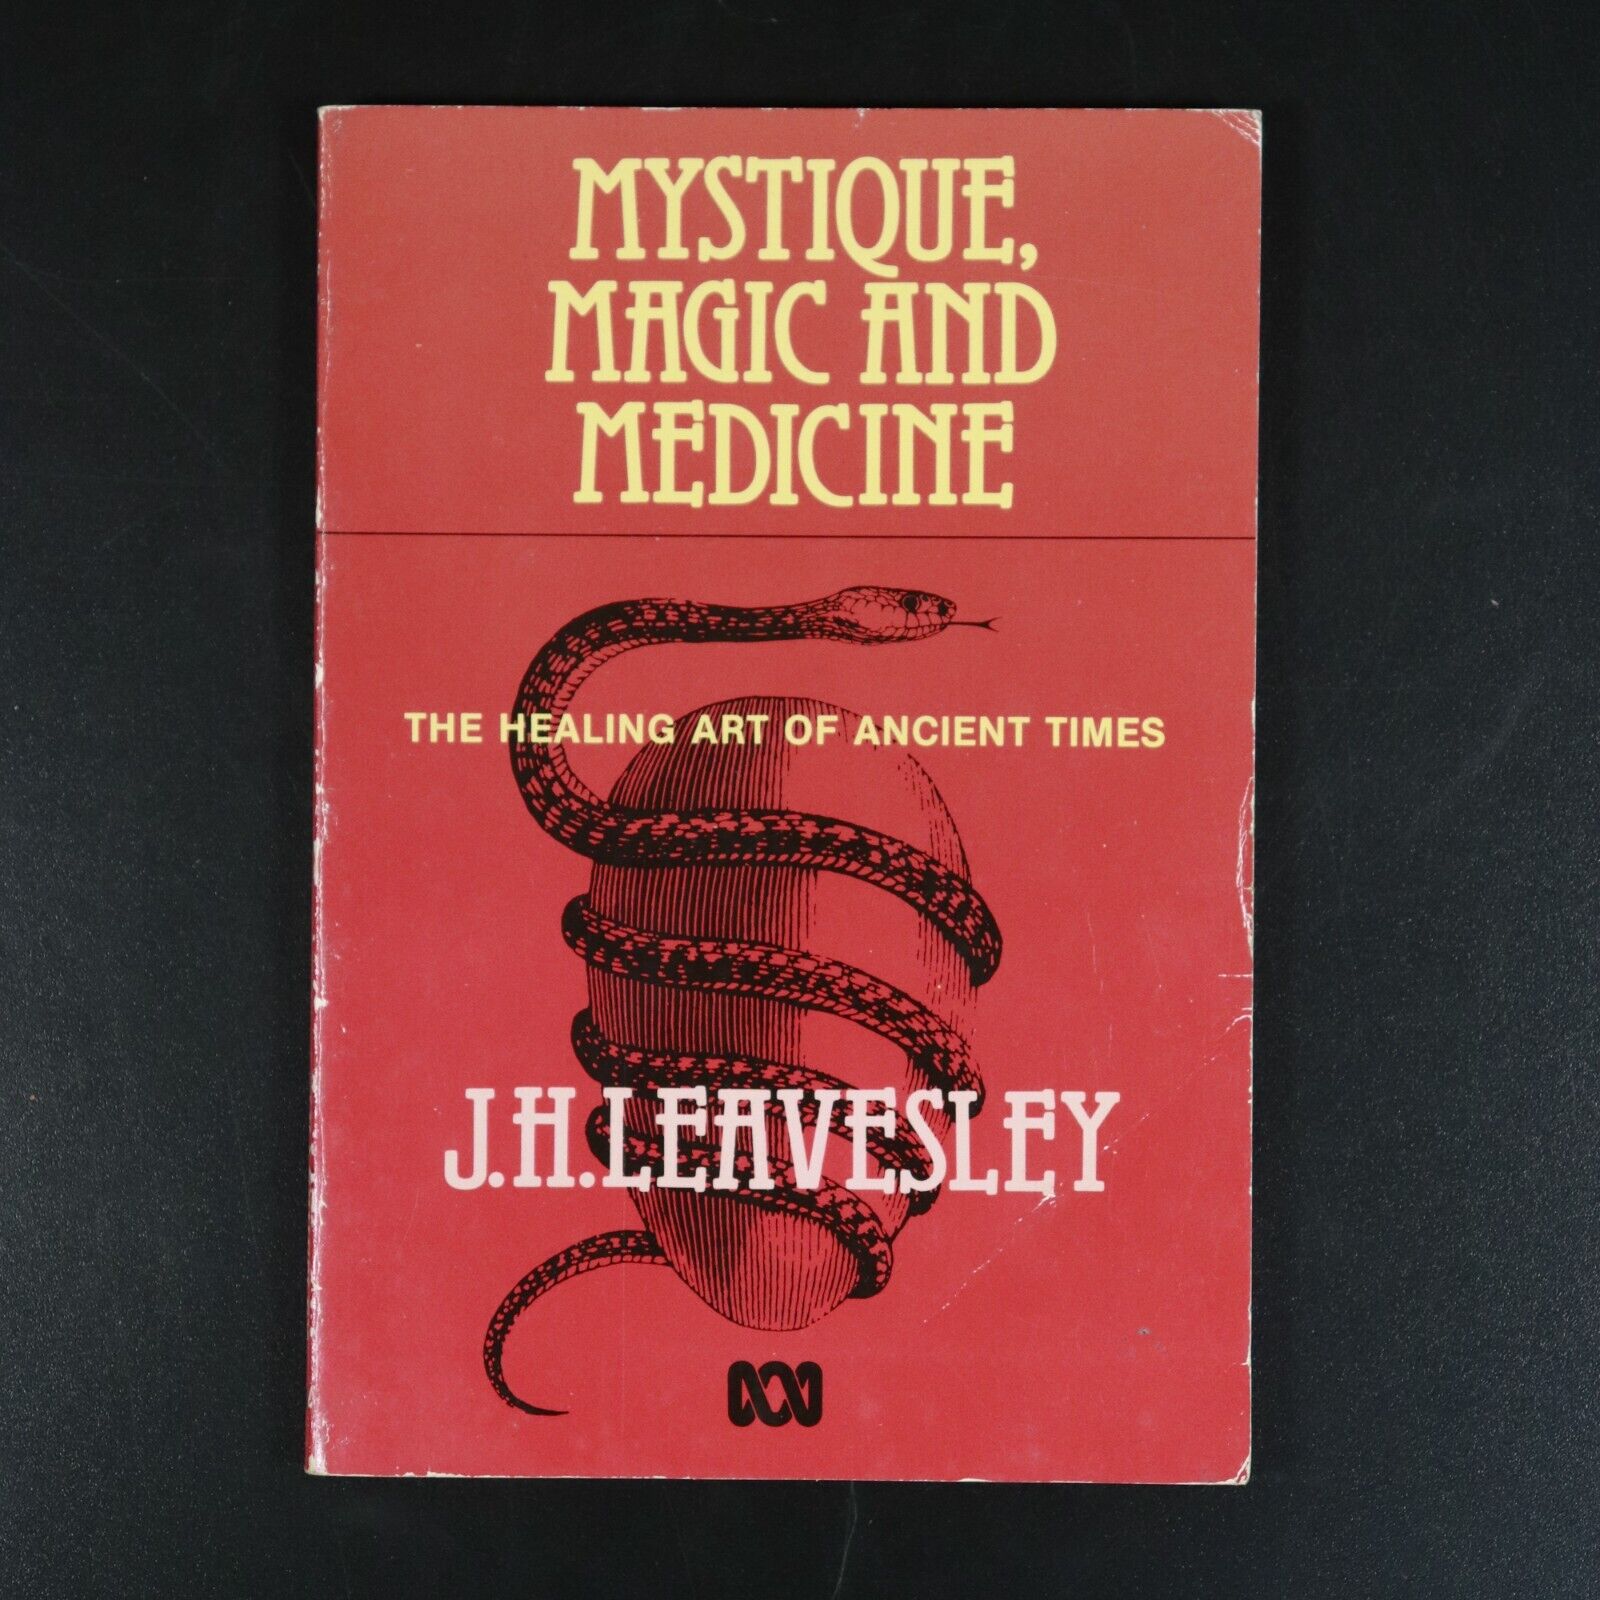 1987 Mystique Magic & Medicine by JH Leavesley 1st Edition Vintage Occult Book